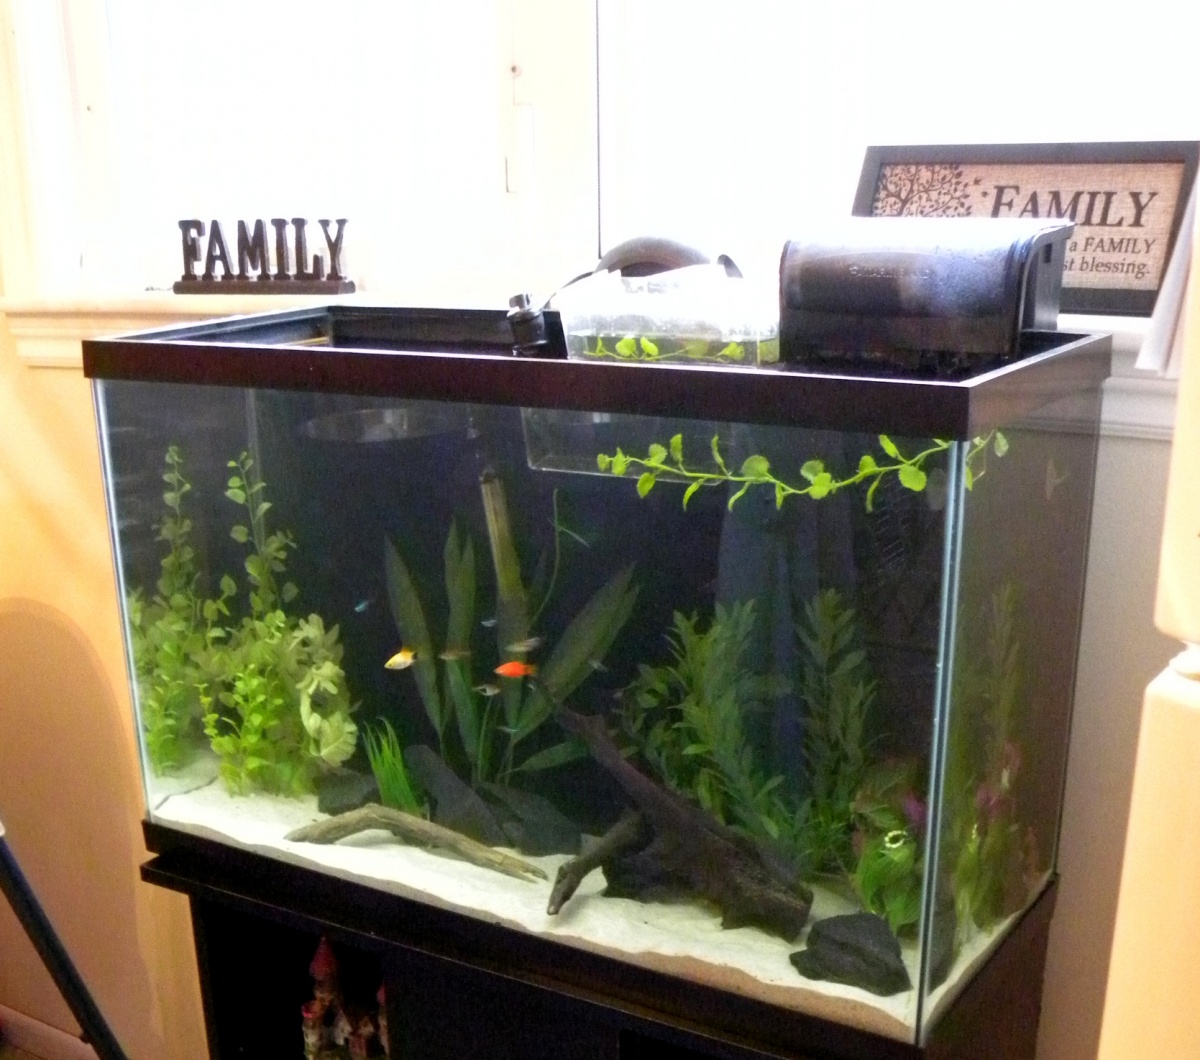 Couple hours after filling and adding the fish. It currently just has all of the fish from my 20 until I get around to moving/cleaning and setting the